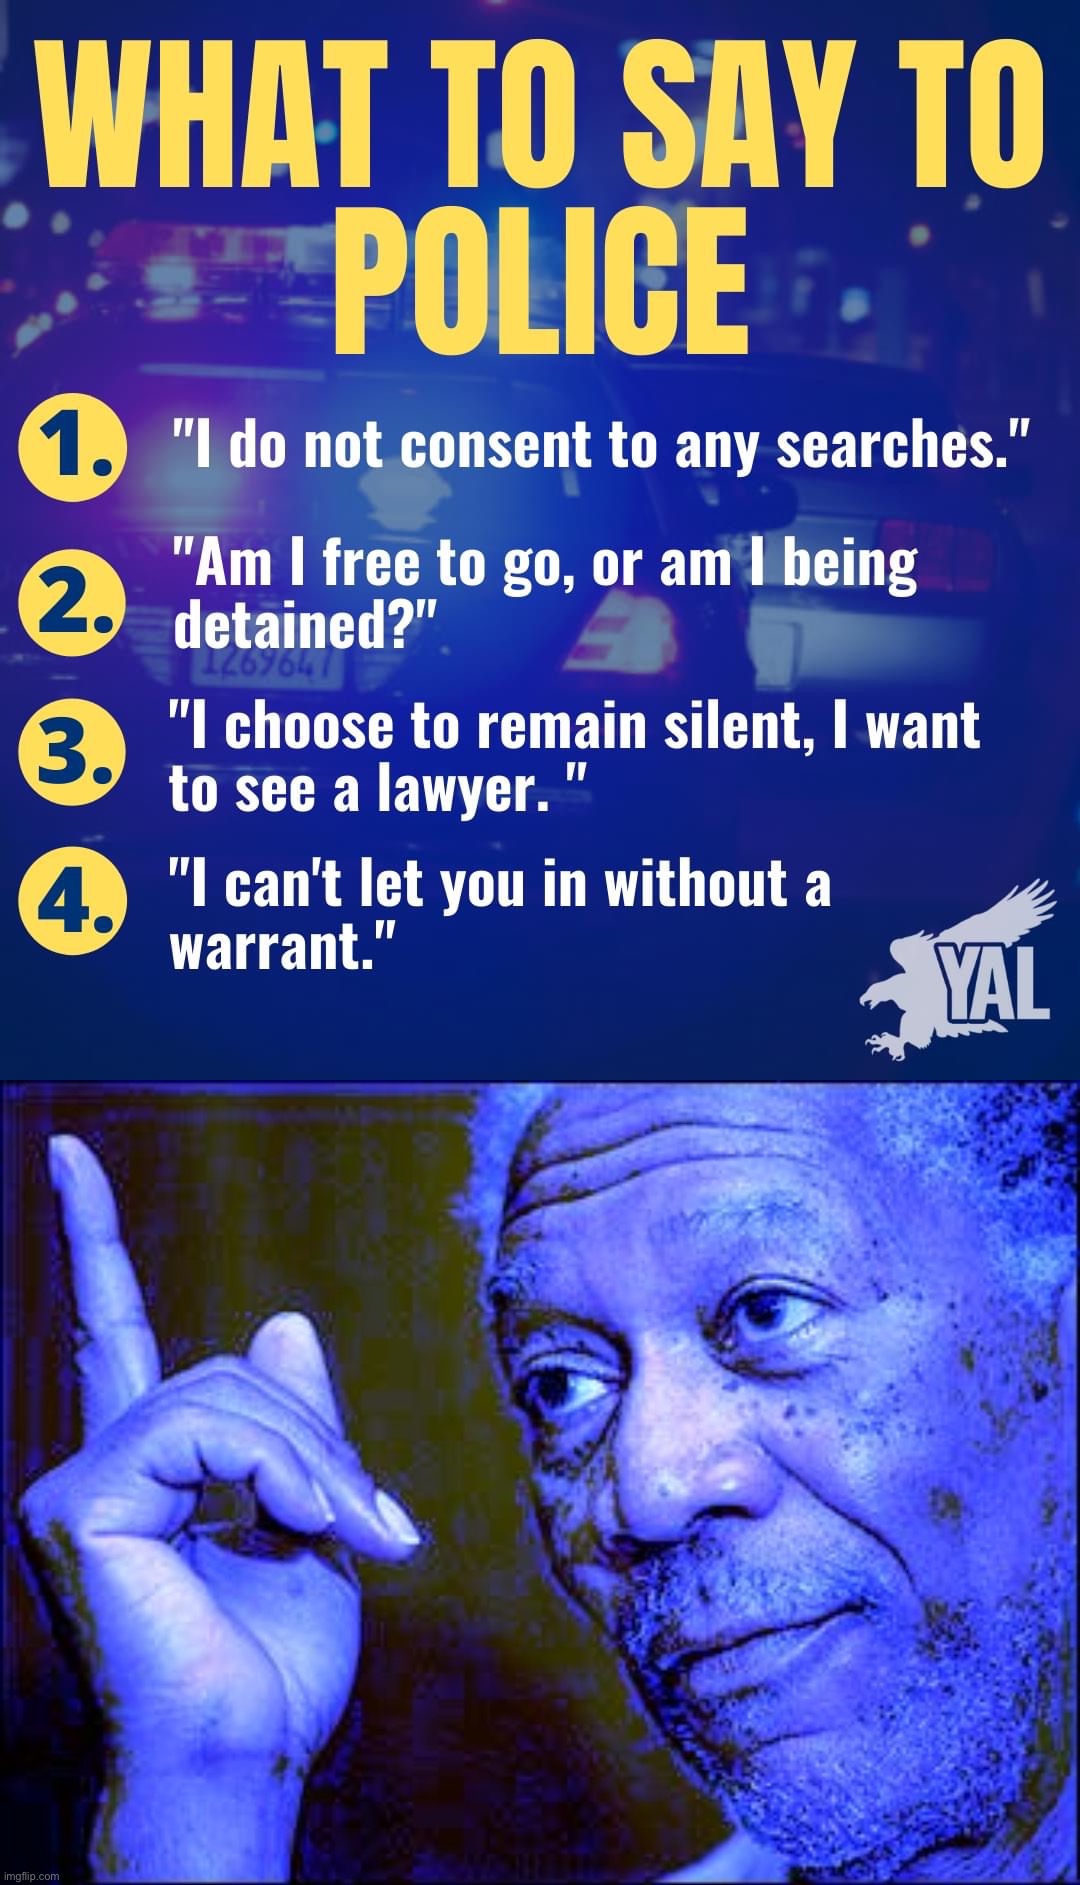 okay, Young Americans for Liberty, you’re based for this | image tagged in what to say to police,morgan freeman this blue version,police brutality,police,civil rights,rights | made w/ Imgflip meme maker